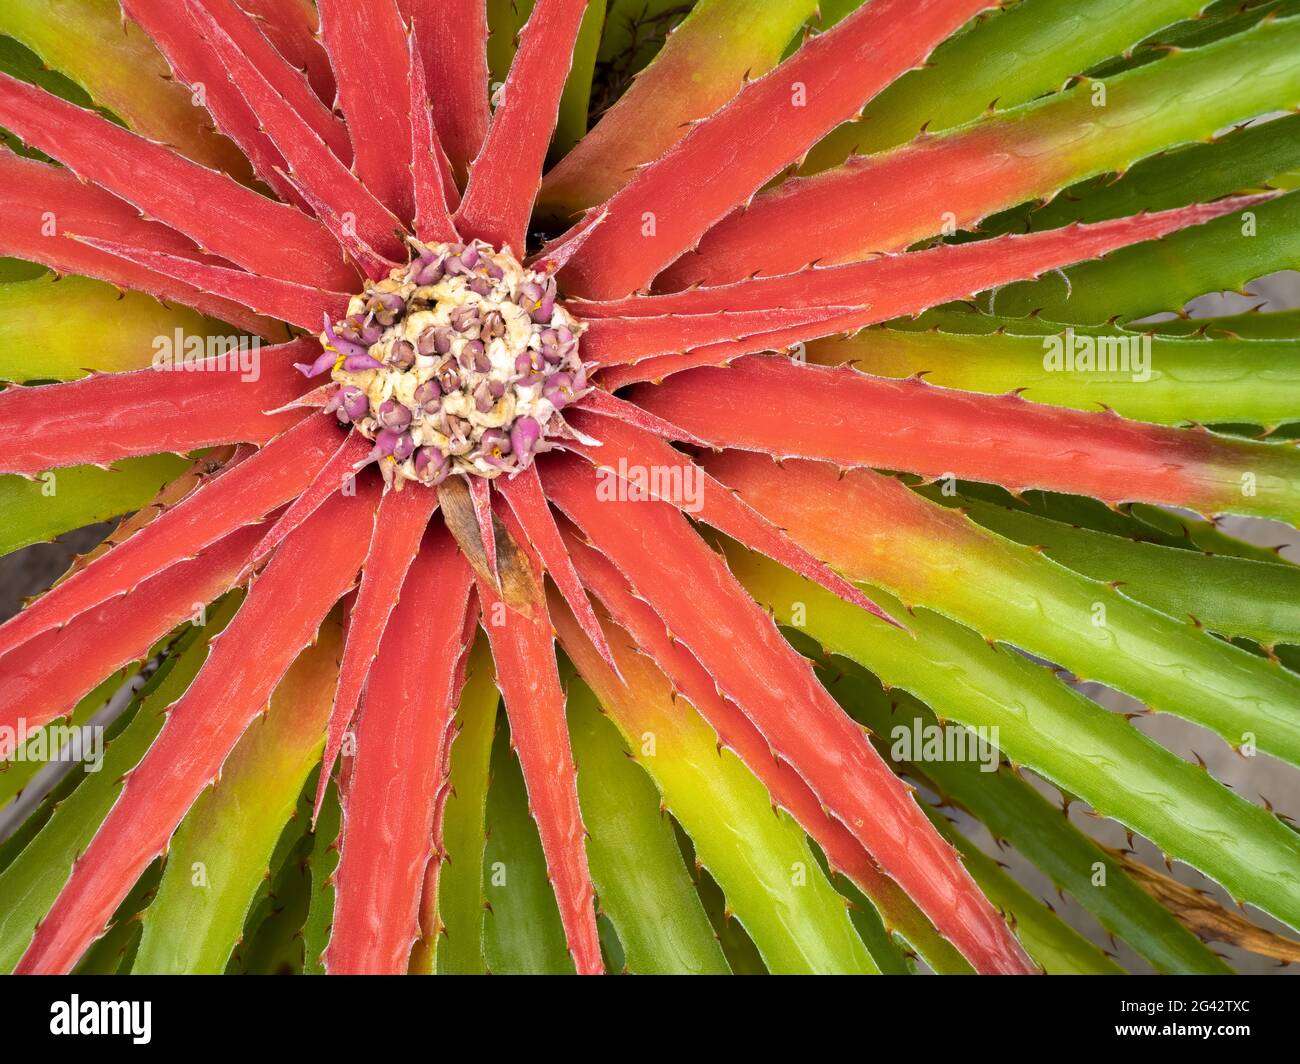 Close up of cactus with red center Stock Photo